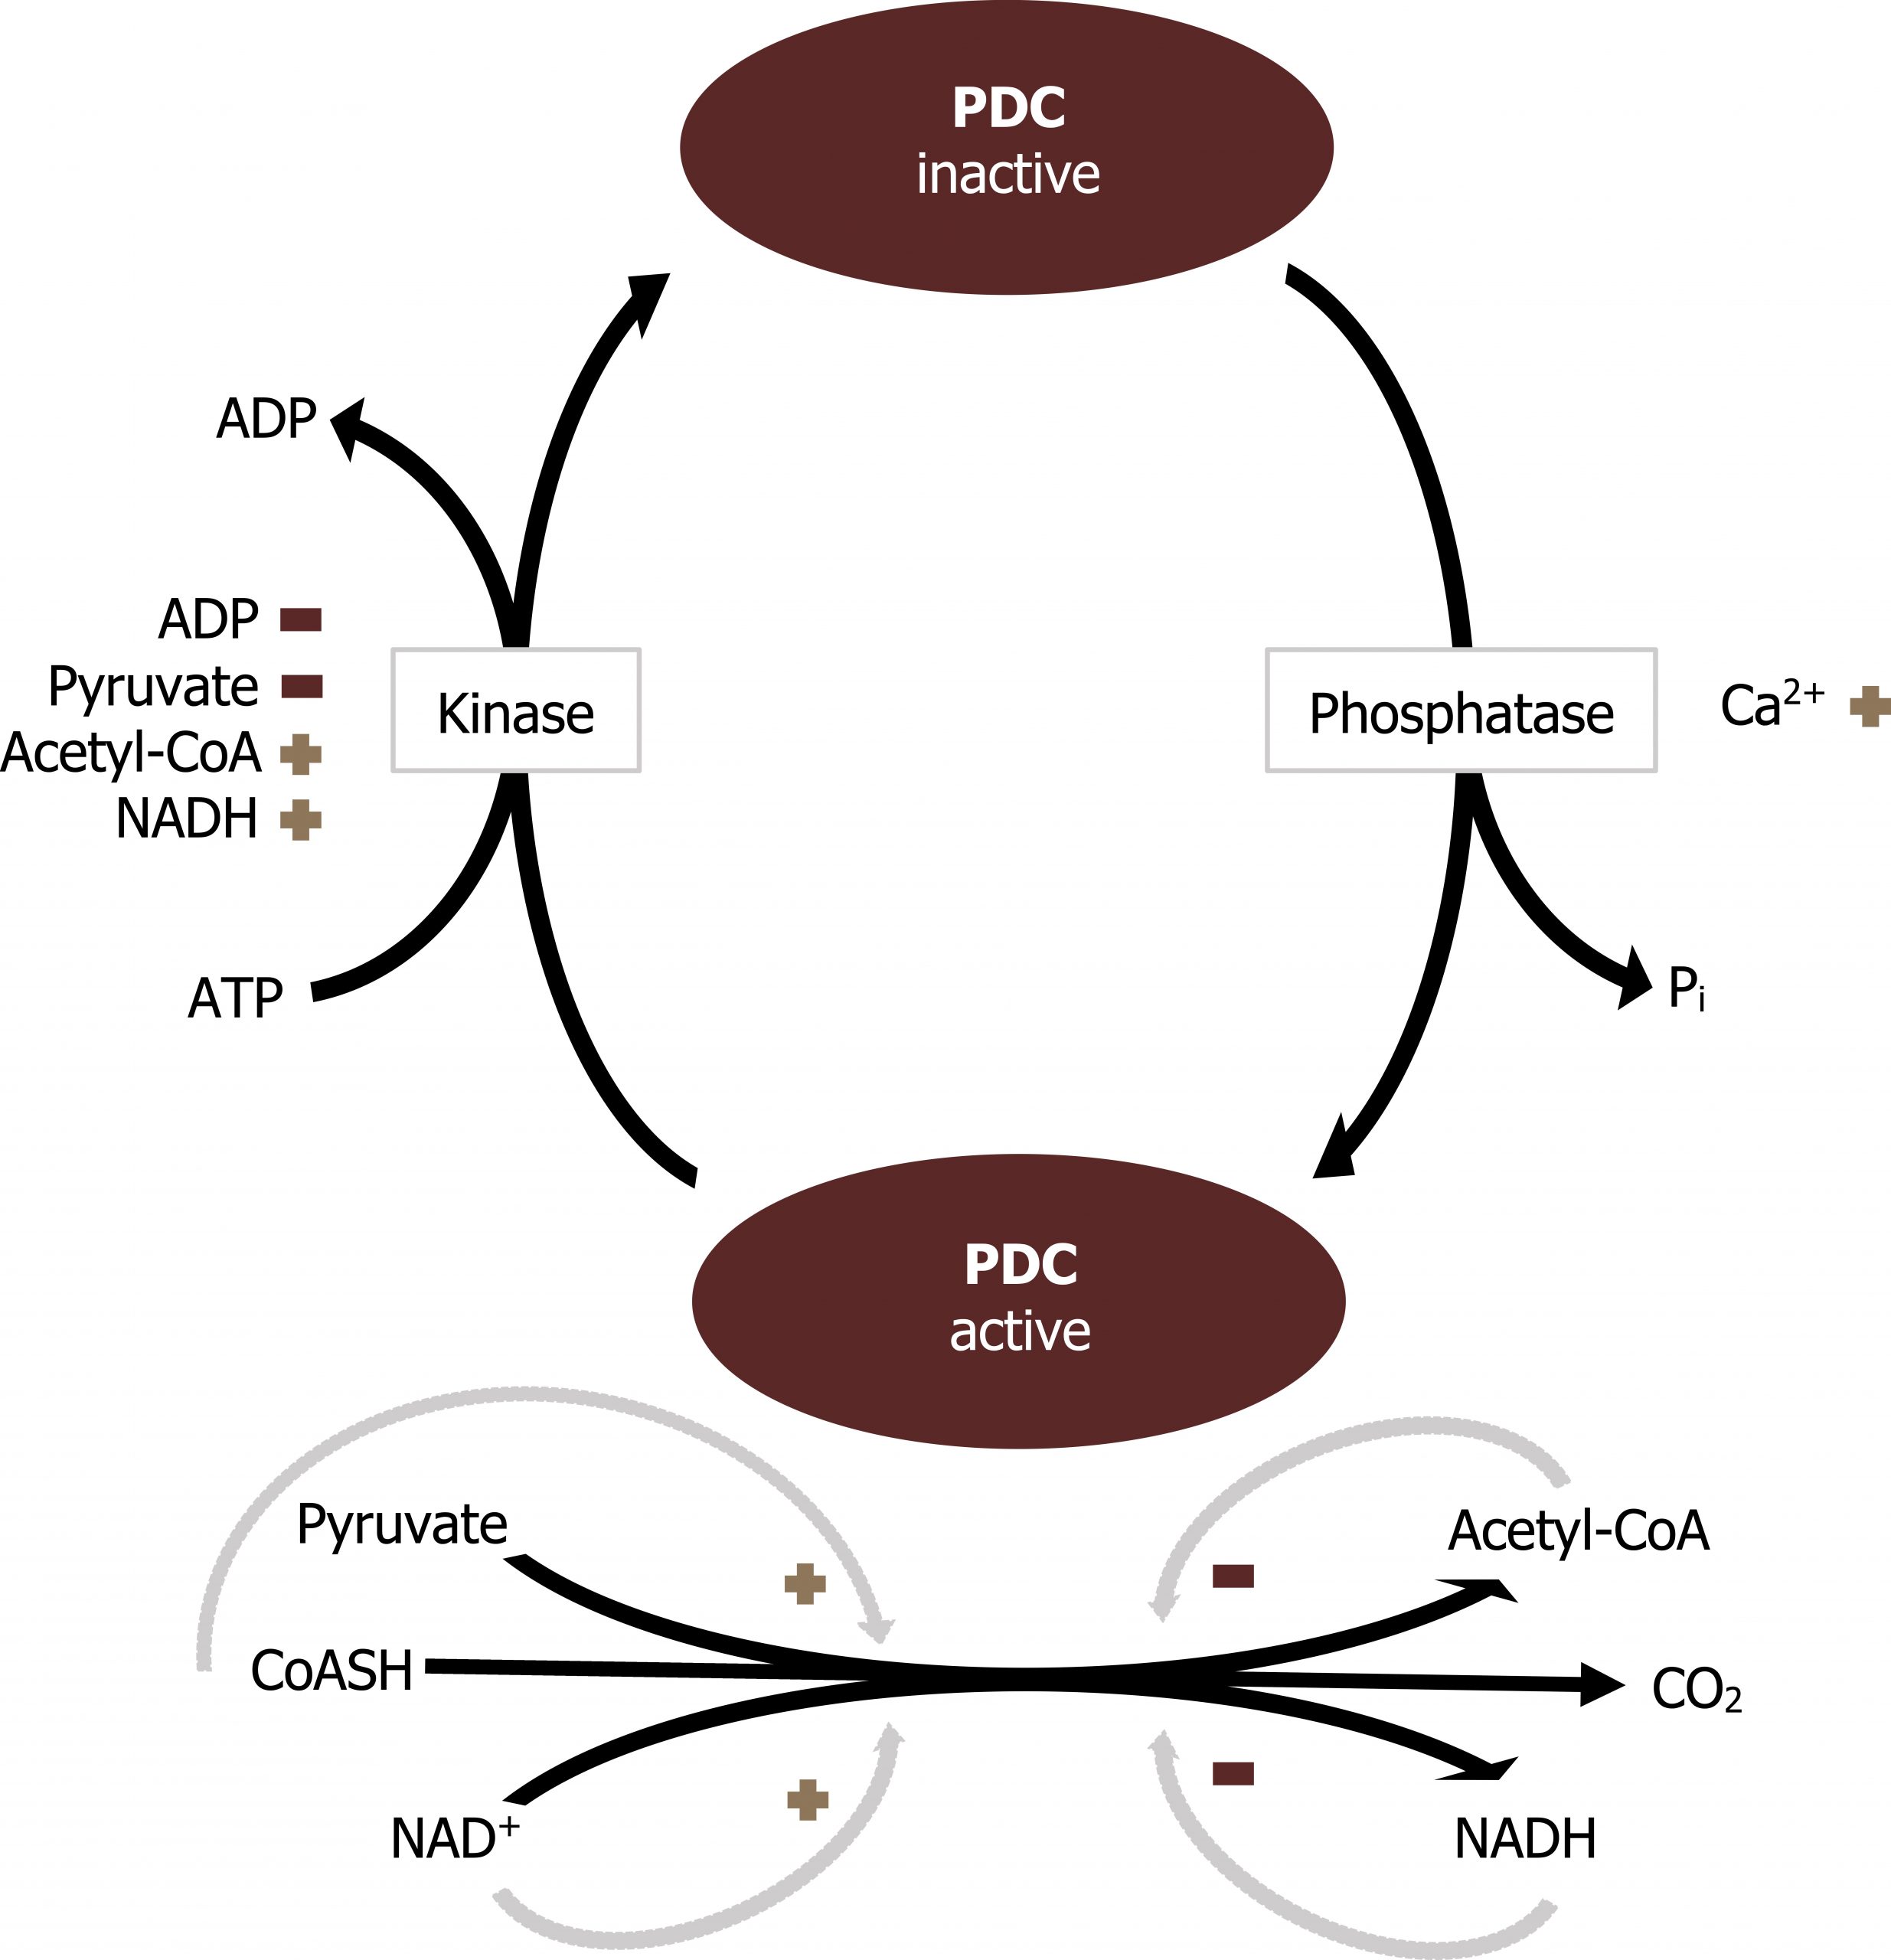 PDC inactive arrow phosphatase arrow PDC active arrow kinase, ATP arrow PDC inactive, ADP. Pi leaves between phosphatase and PDC active. Calcium activates phosphatase. NADH and acetyl-CoA activate kinase. Pyruvate and ADP inhibit kinase. Under PDC active, coASH to CO2. Pyruvate and NAD+ activate and acetyl-CoA and NADH inhibit.